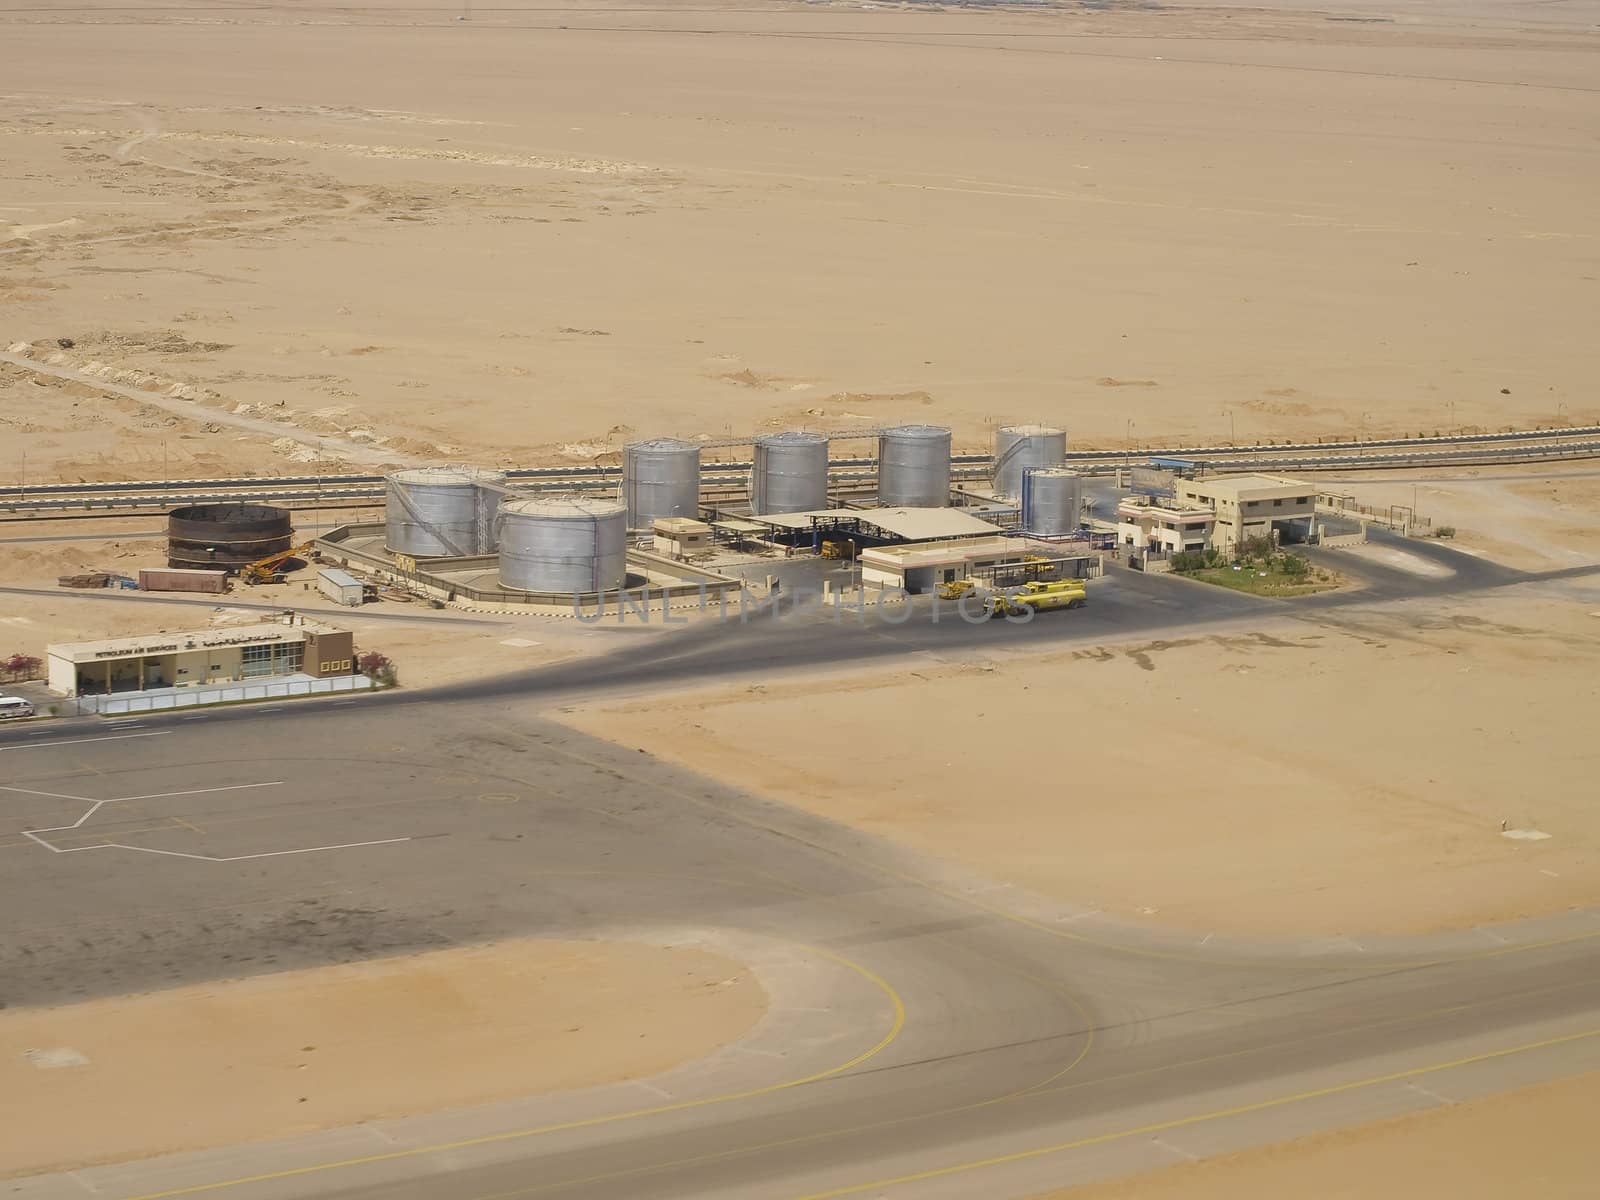 Aerial View of a refinery in the desert